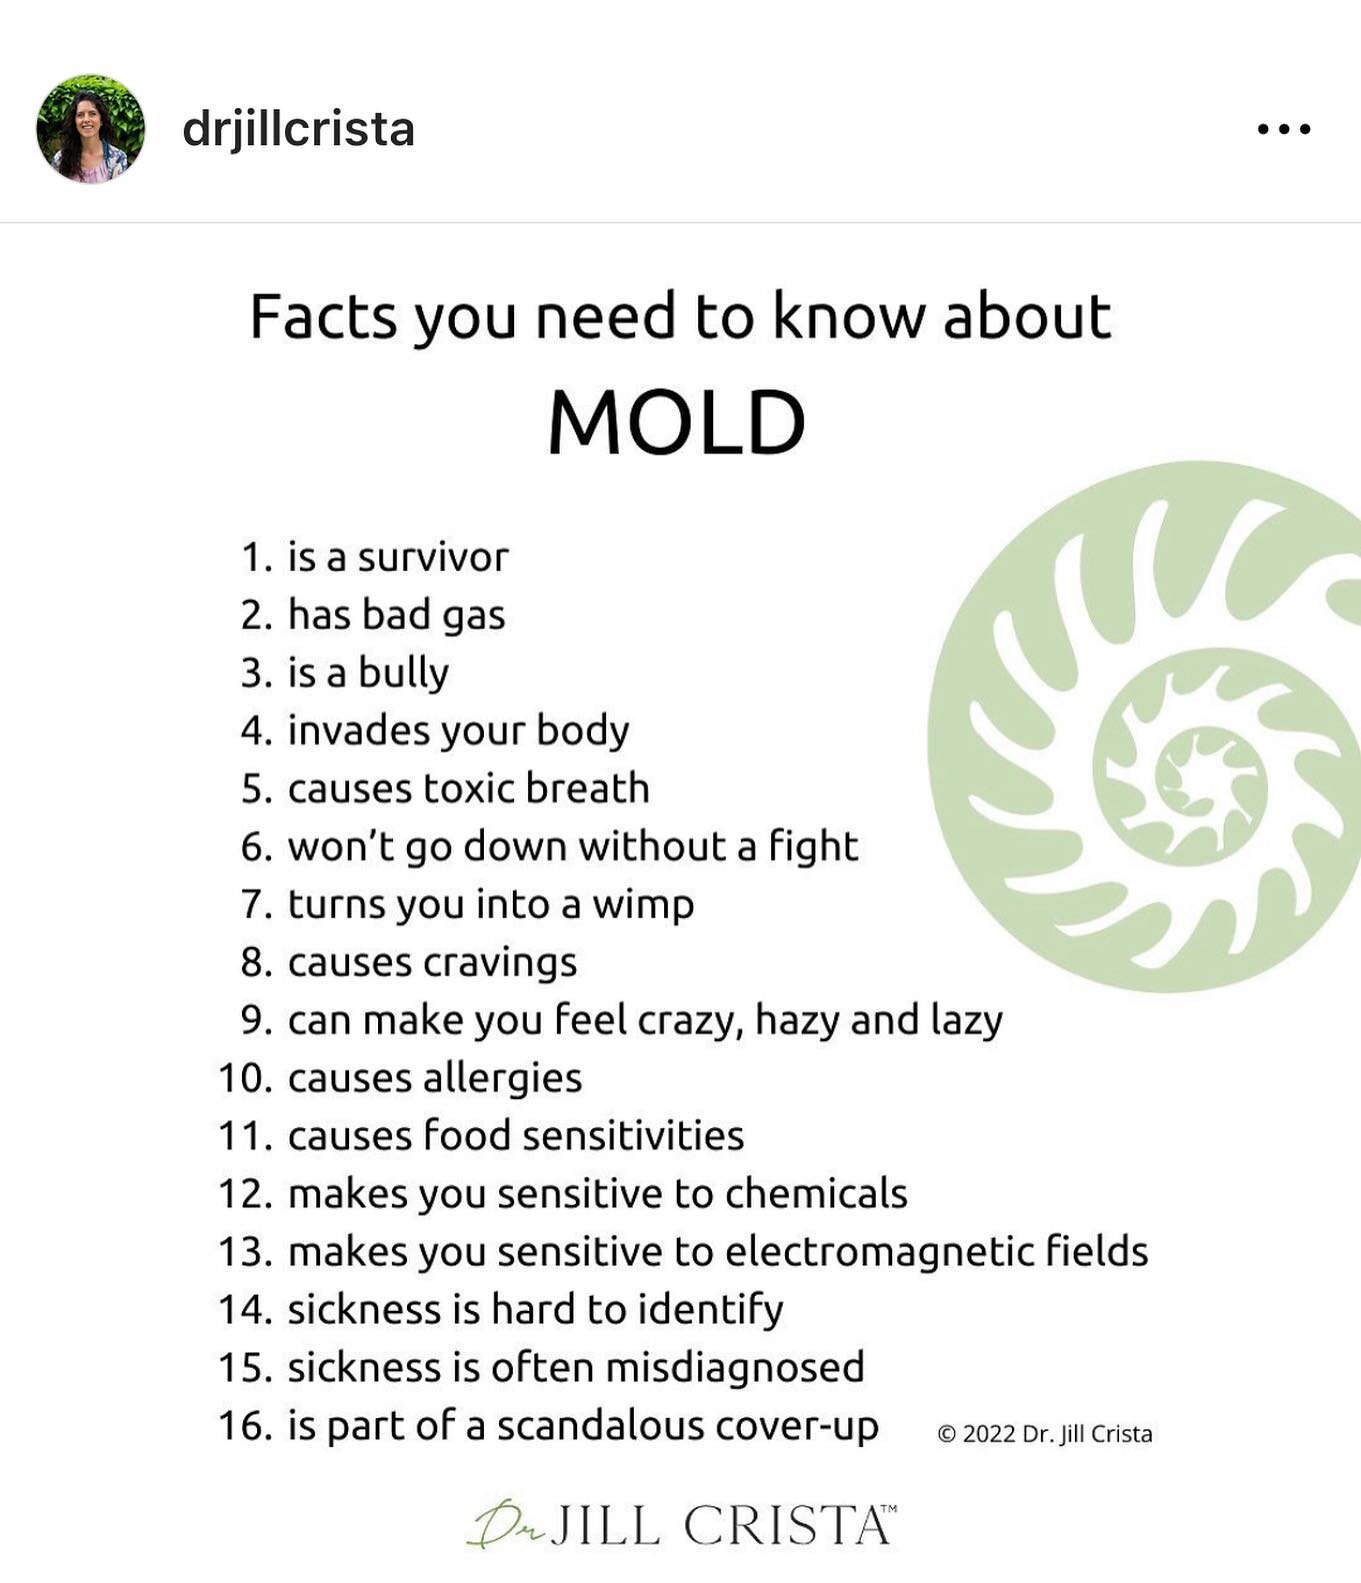 &ldquo;HOW did you know it was #toxicmold ?

I&rsquo;m asked all the time about my journey with #mcas and #toxicmoldexposure - honestly, it&rsquo;s hidden most of the time, you&rsquo;ll be misdiagnosed, it starts with 1 symptom that morphs into sever